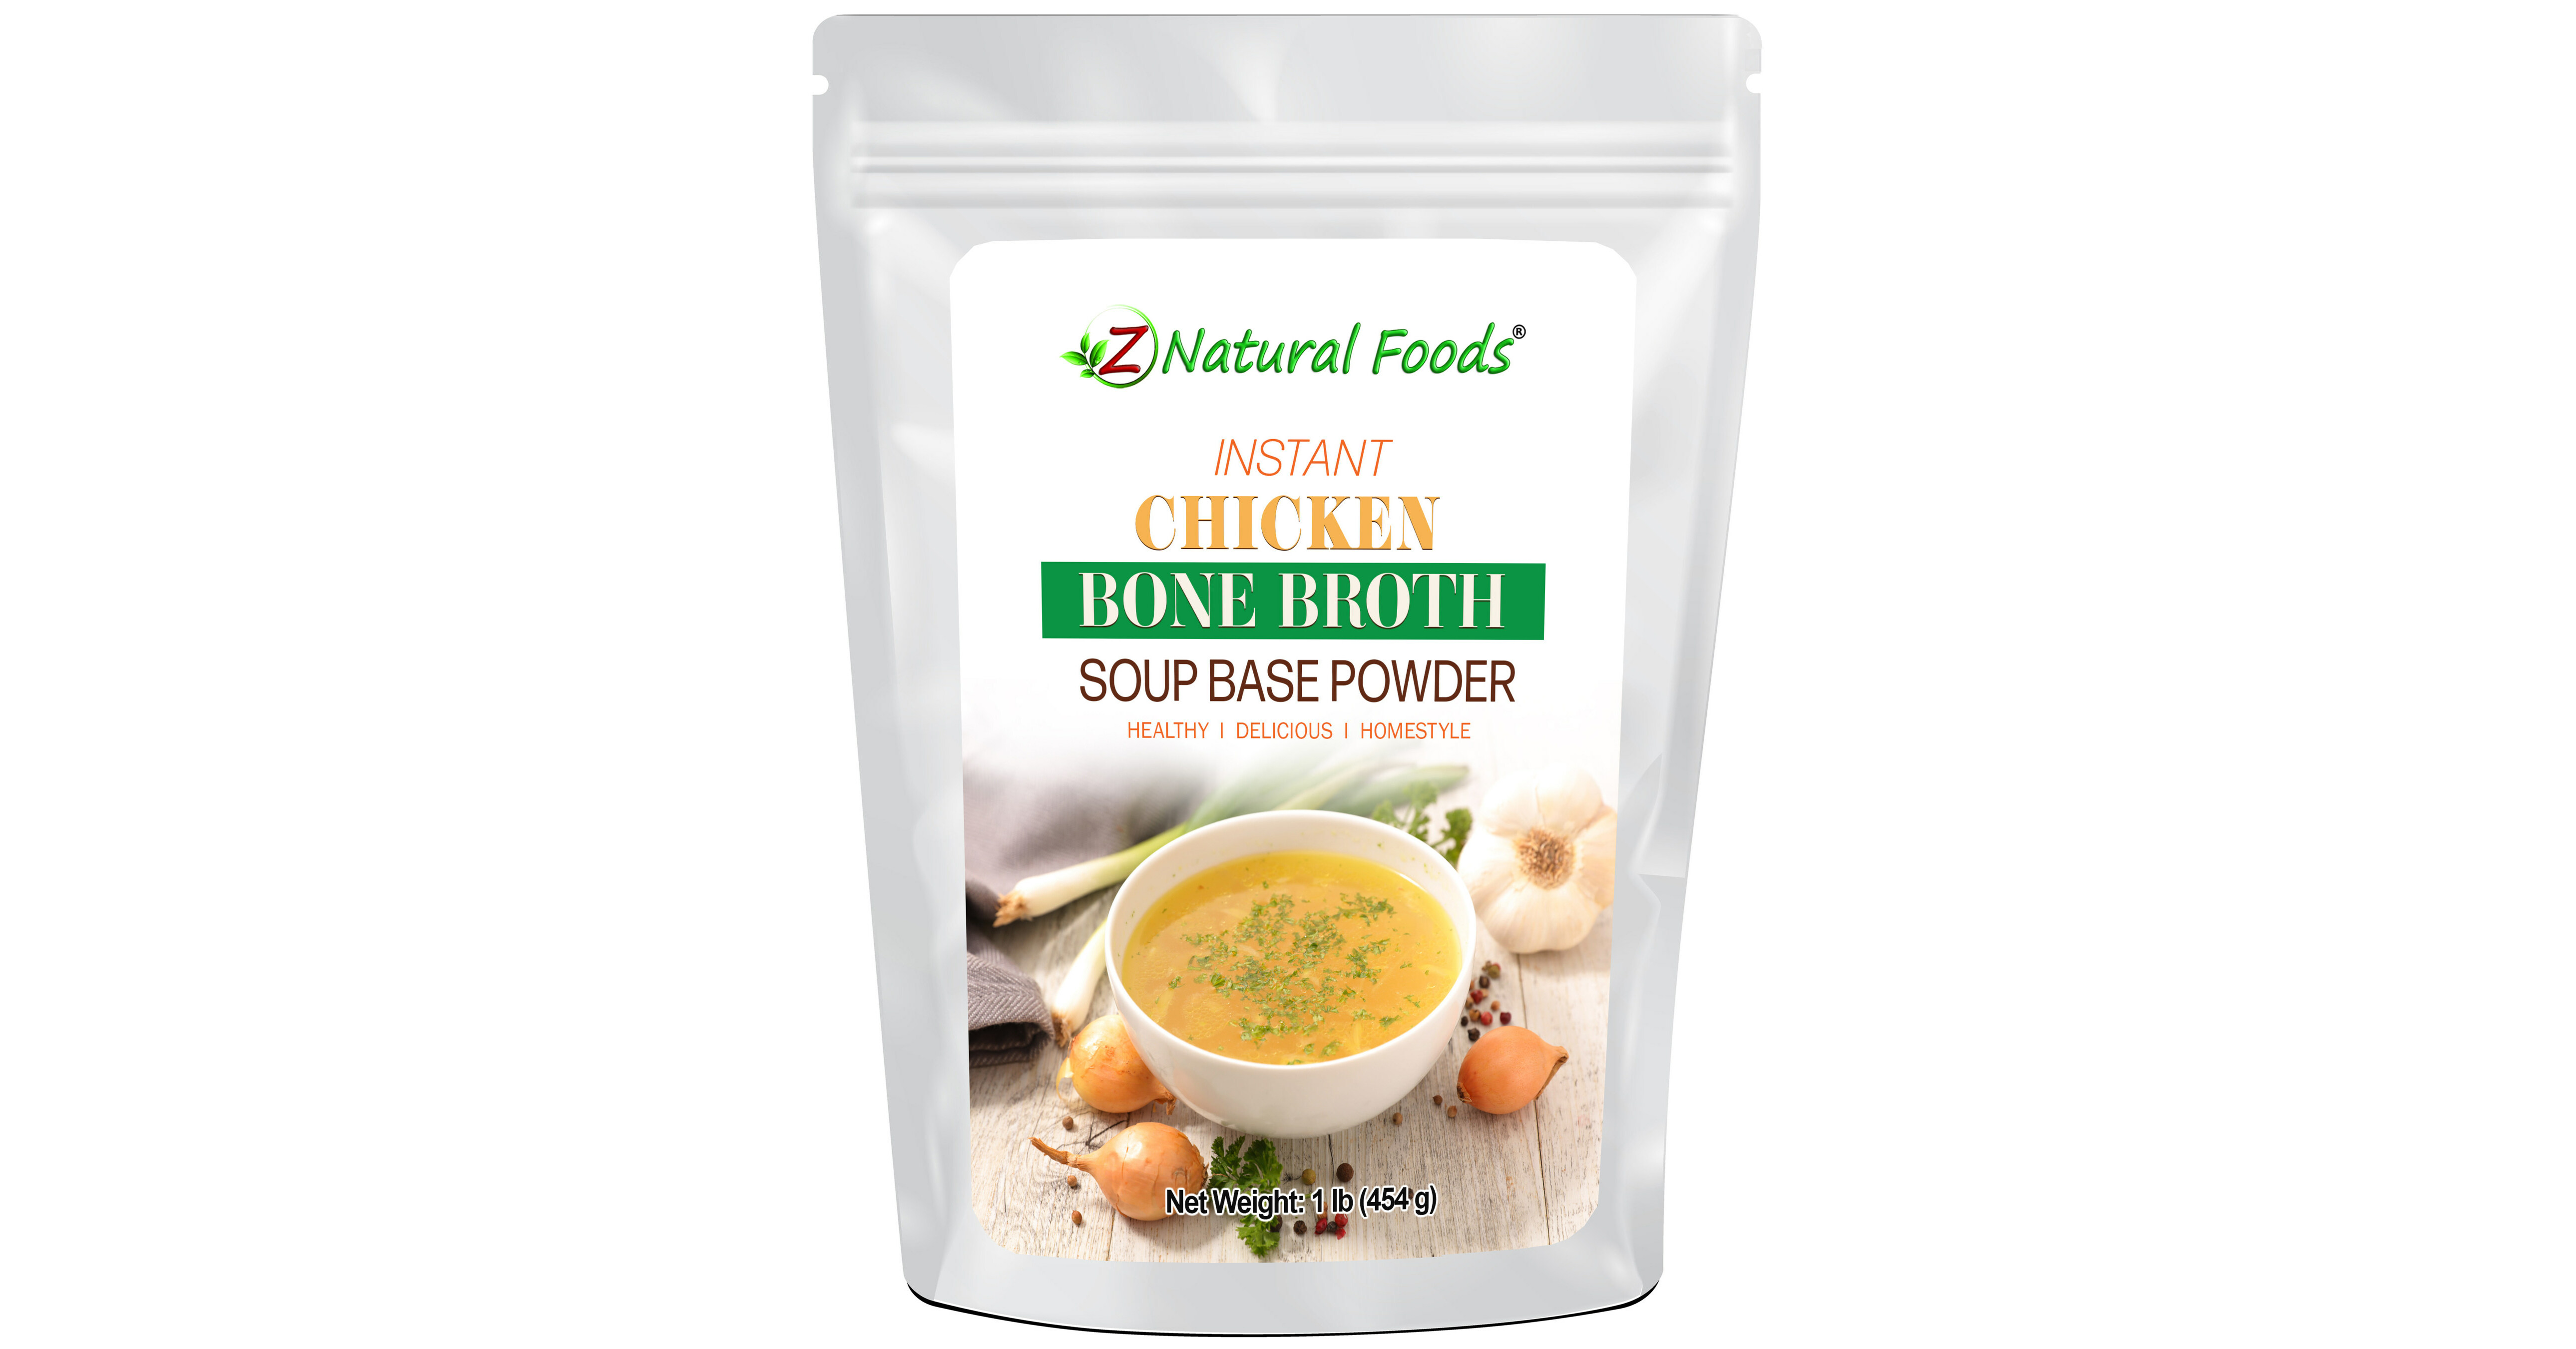 Z Natural Foods® Launches Instant Chicken Bone Broth Soup Base Powder